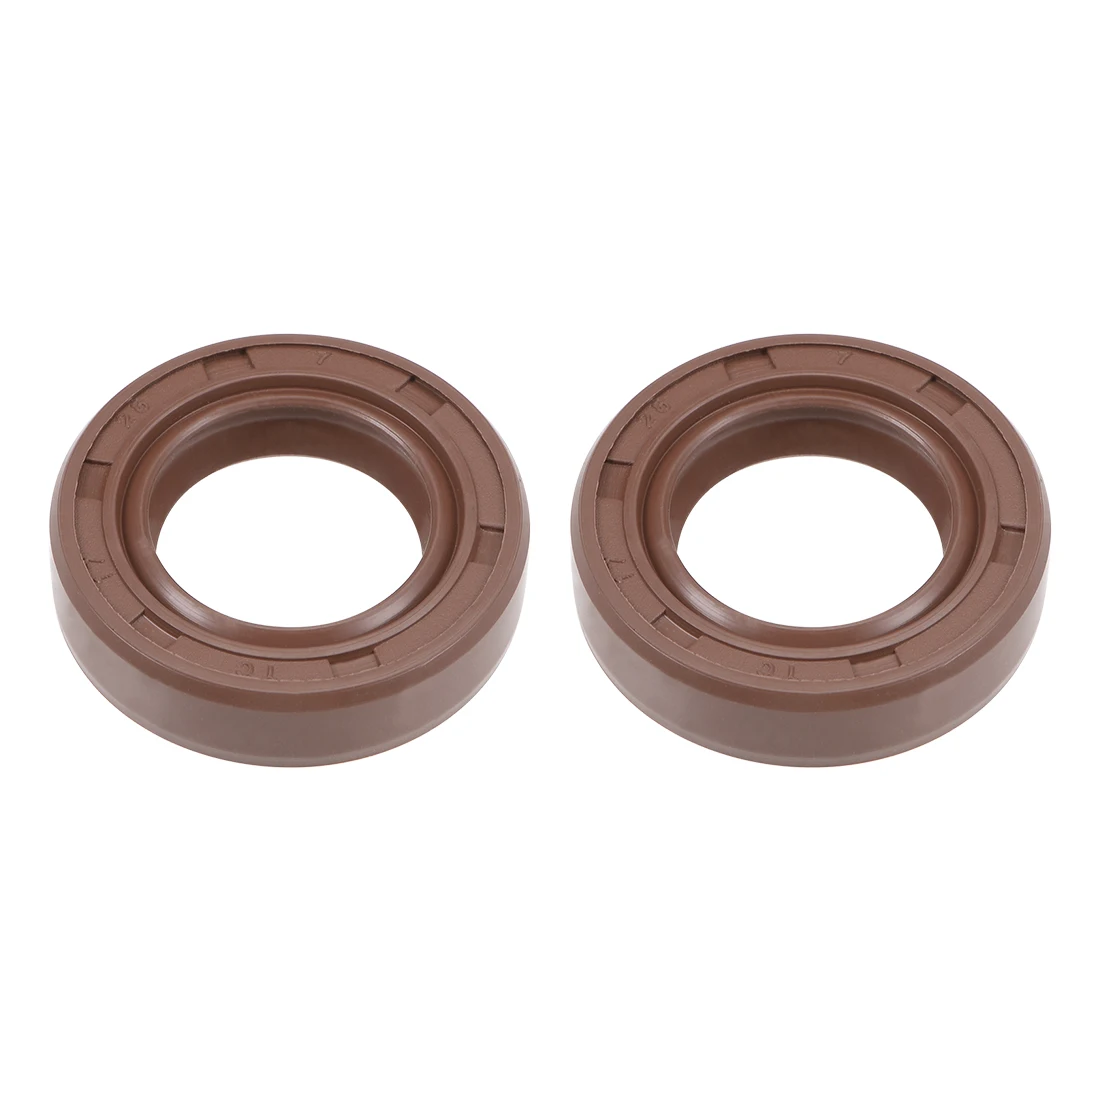 uxcell Oil Seal 28mm Inner Dia 40mm OD 10mm Thick Fluorine Rubber Double Lip Seals